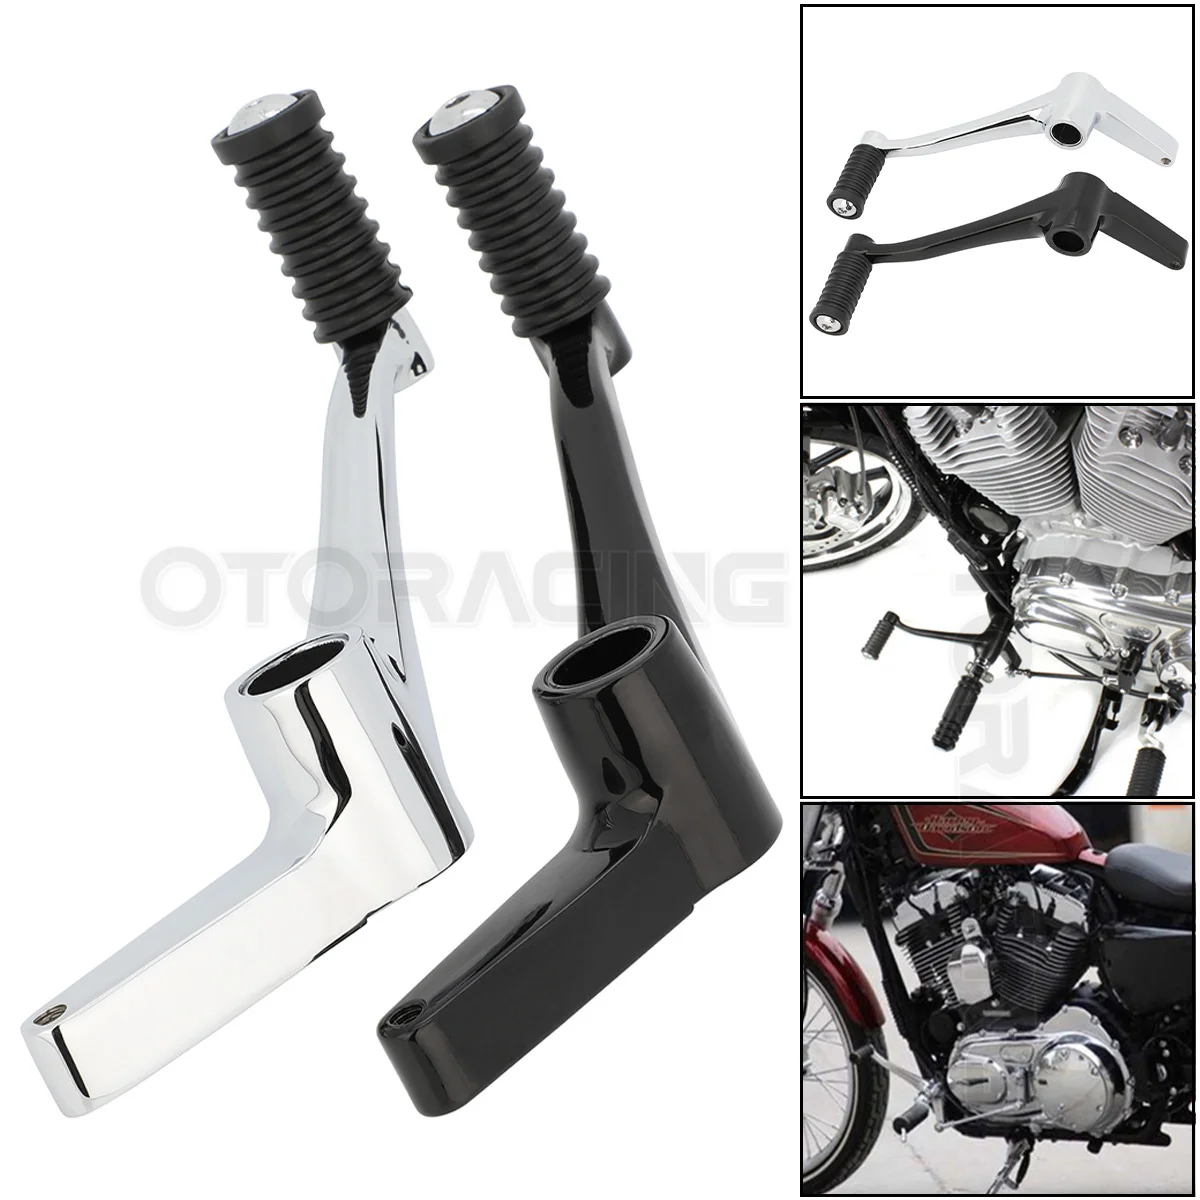 

Motorcycle Forward Controls Rear Foot Brake Lever Case For Harley Sportster 883 1200 XL883 XL1200 Forty Eight X72 X48